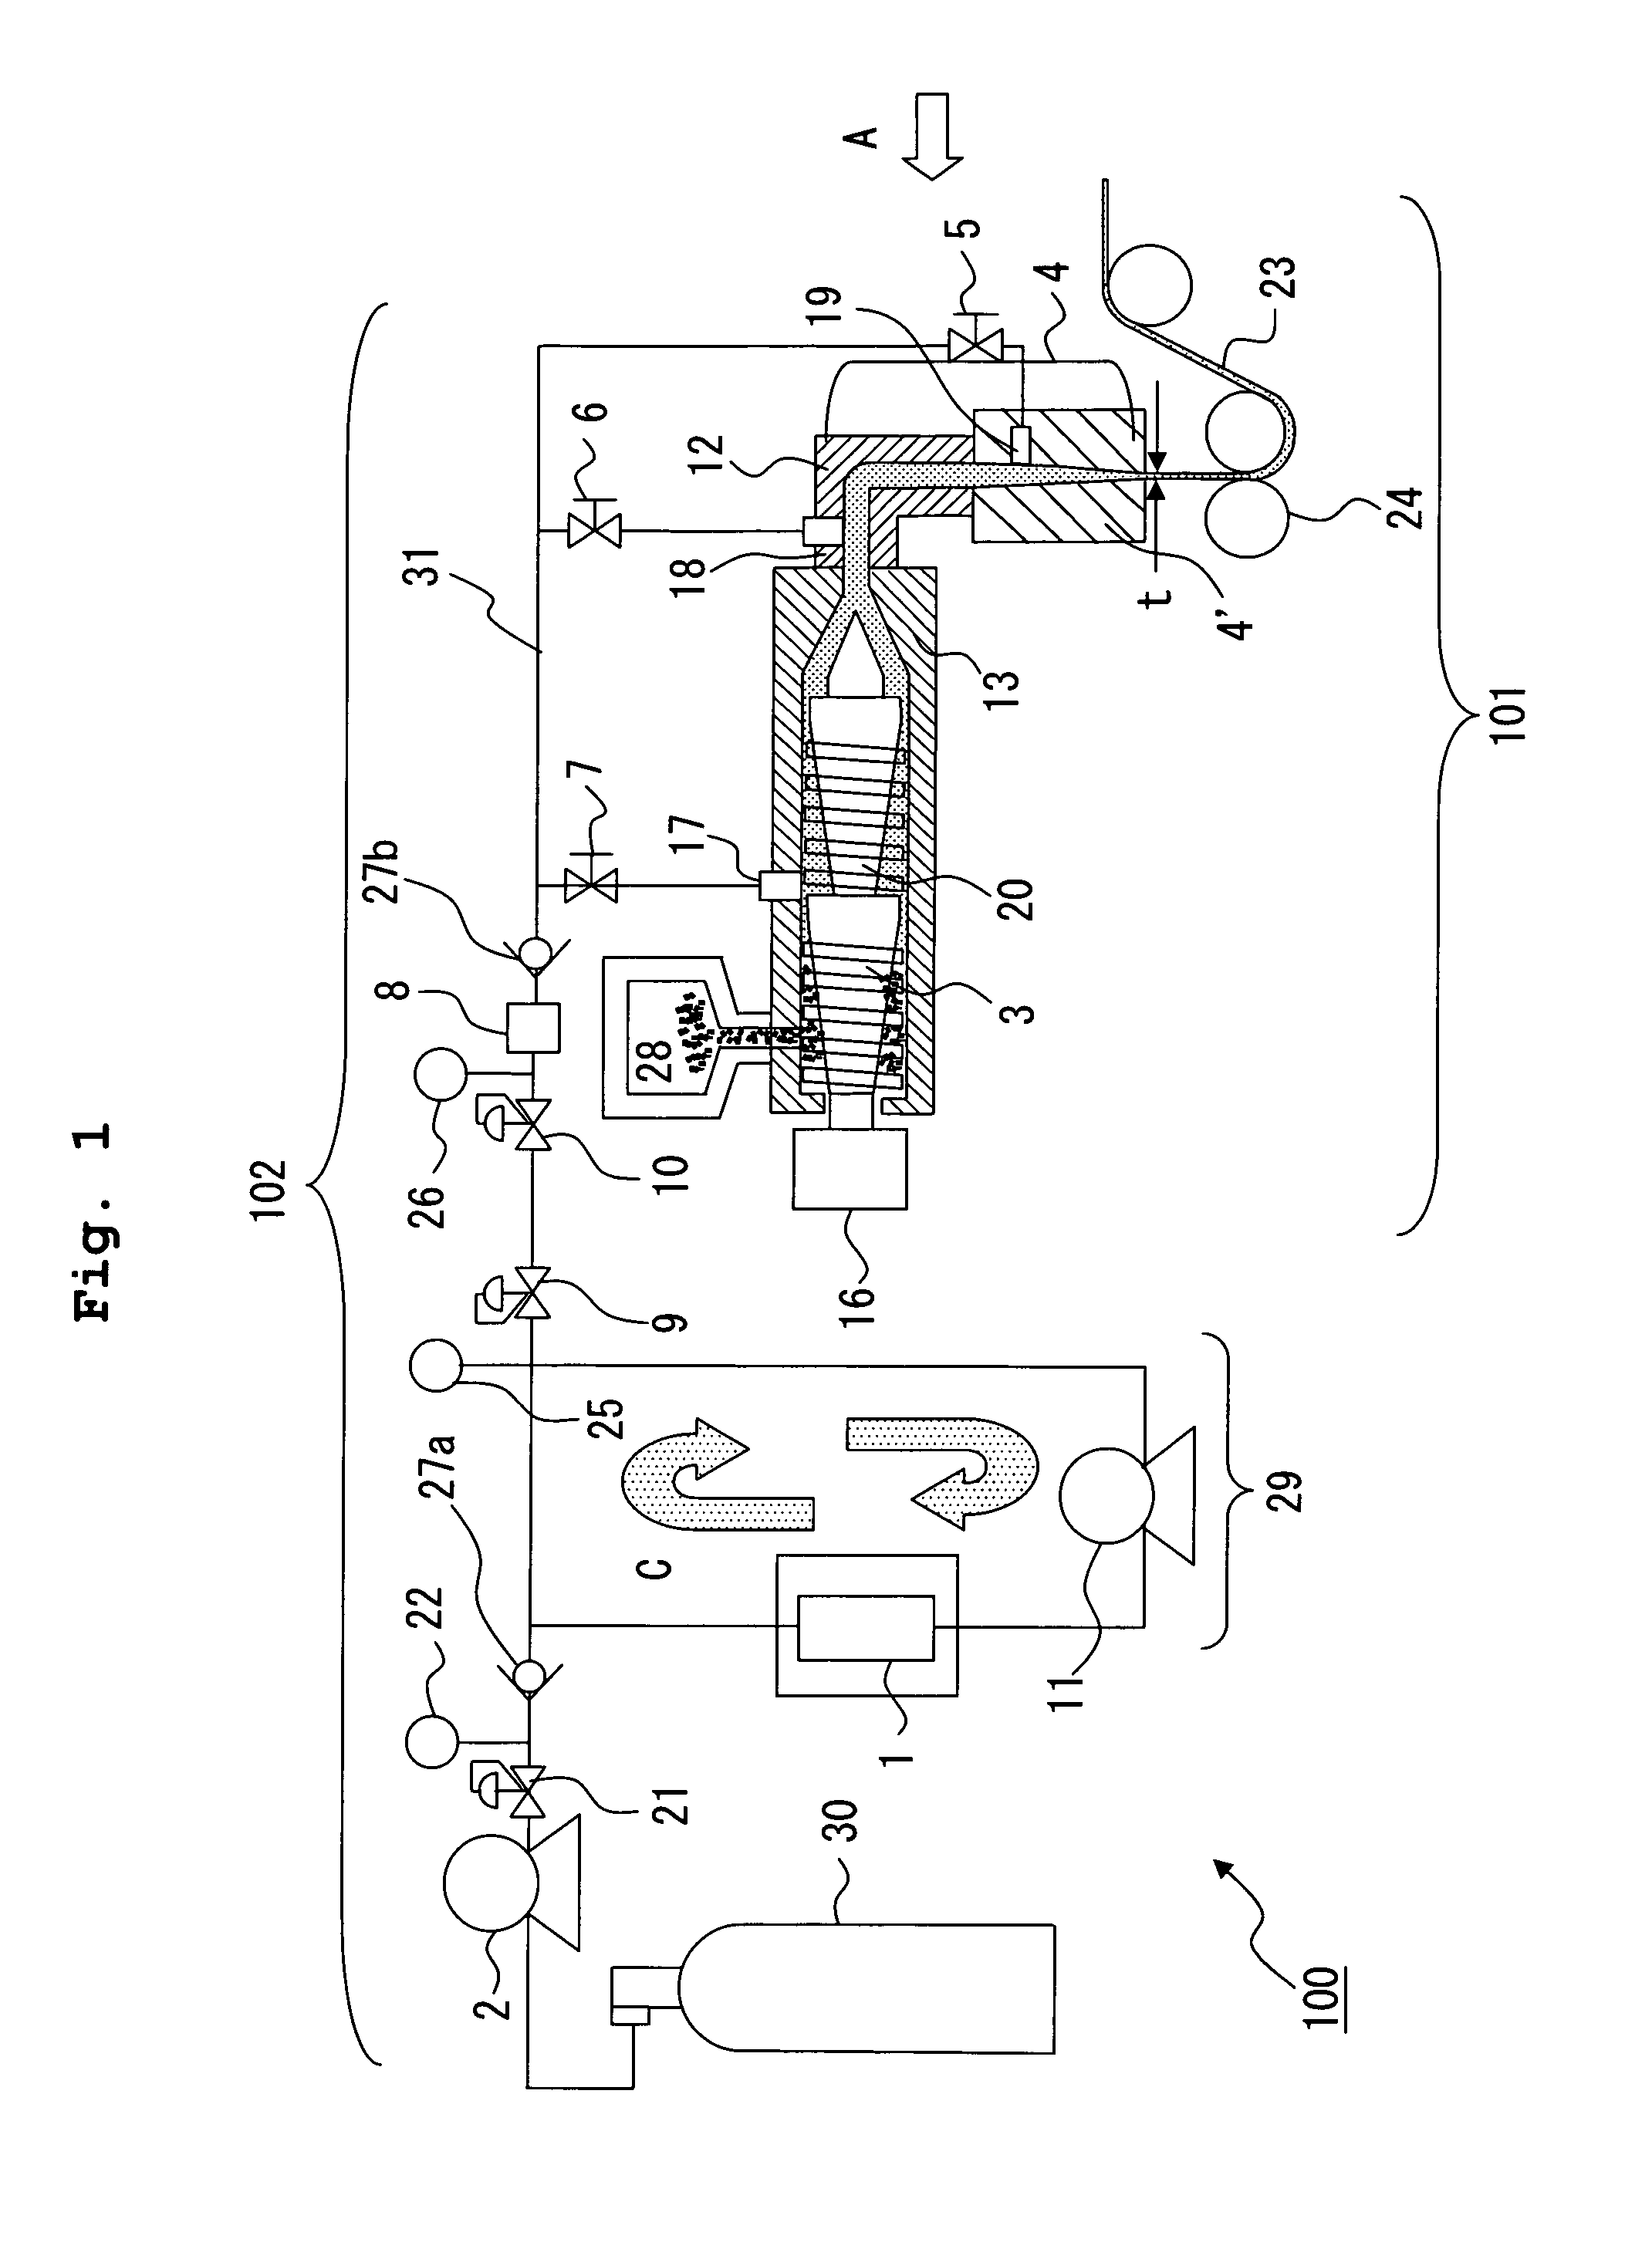 Method of producing a metallized molded article utilizing a pressurized fluid containing a metal complex